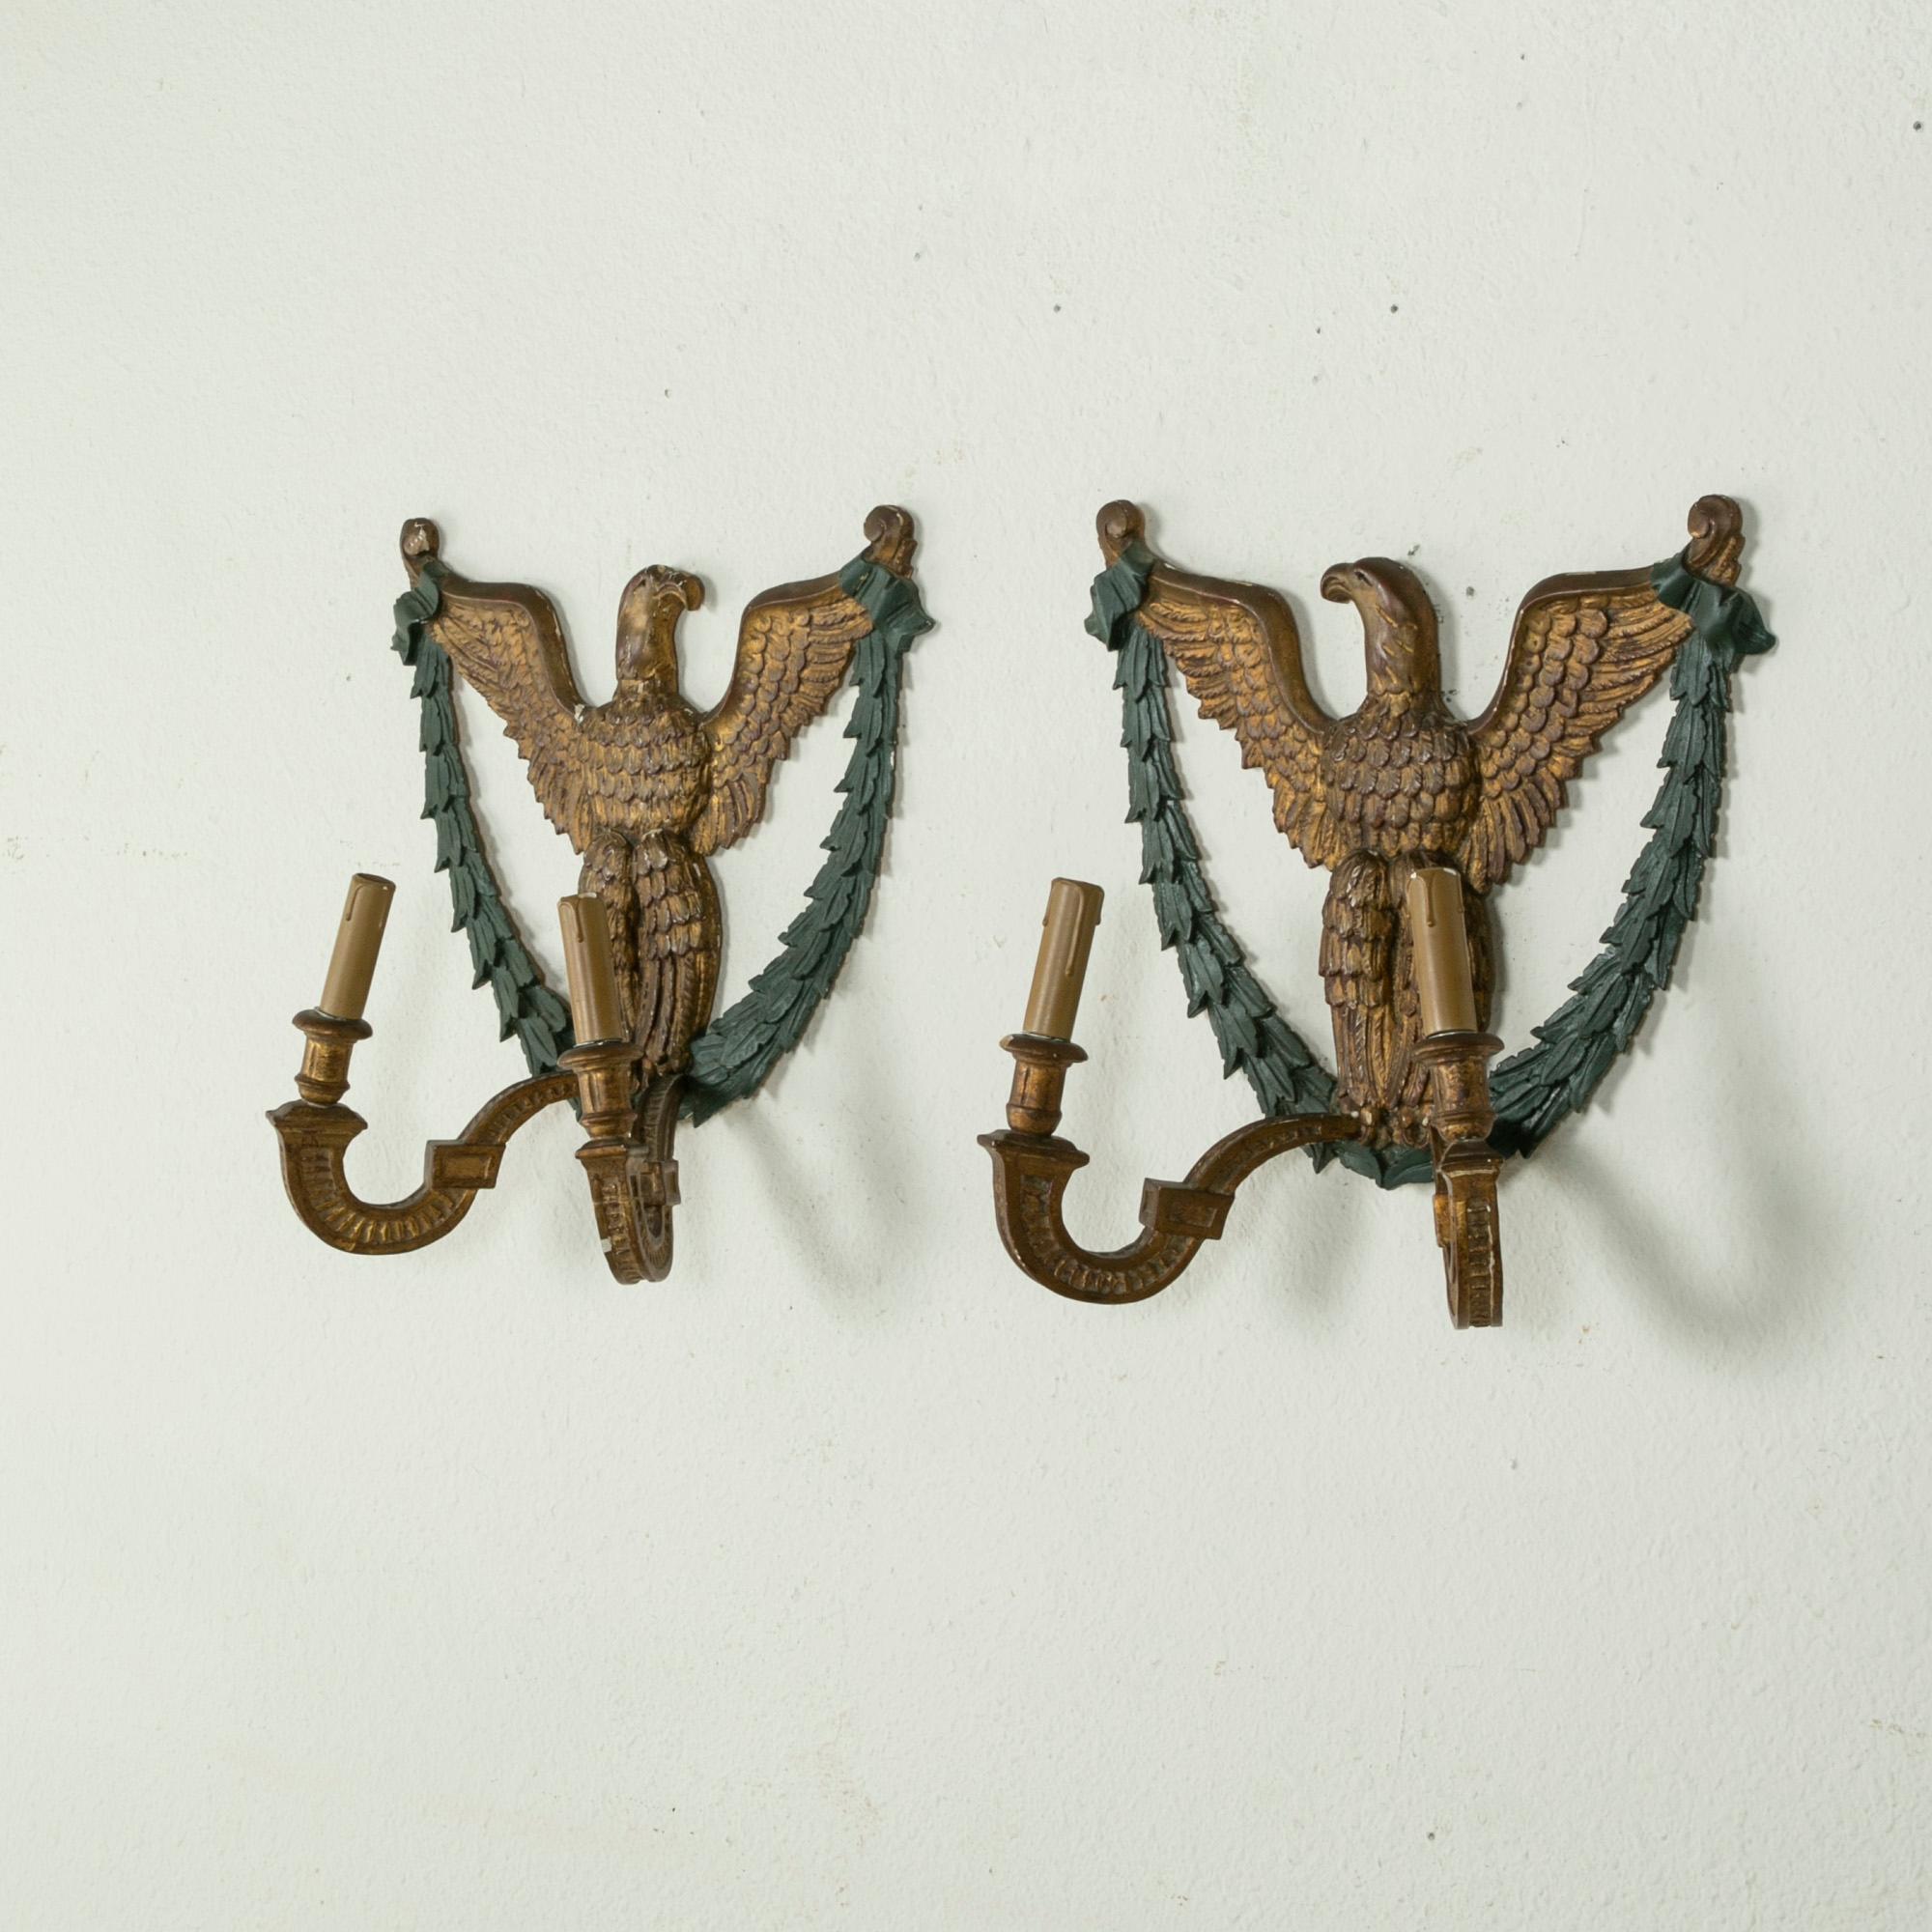 At almost 18 inches in height, this pair of French Empire style gilt wood sconces from the turn of the twentieth century features opposing Napoleonic eagles holding laurels in their talons. Each sconce has two arms for lights. Wired to American